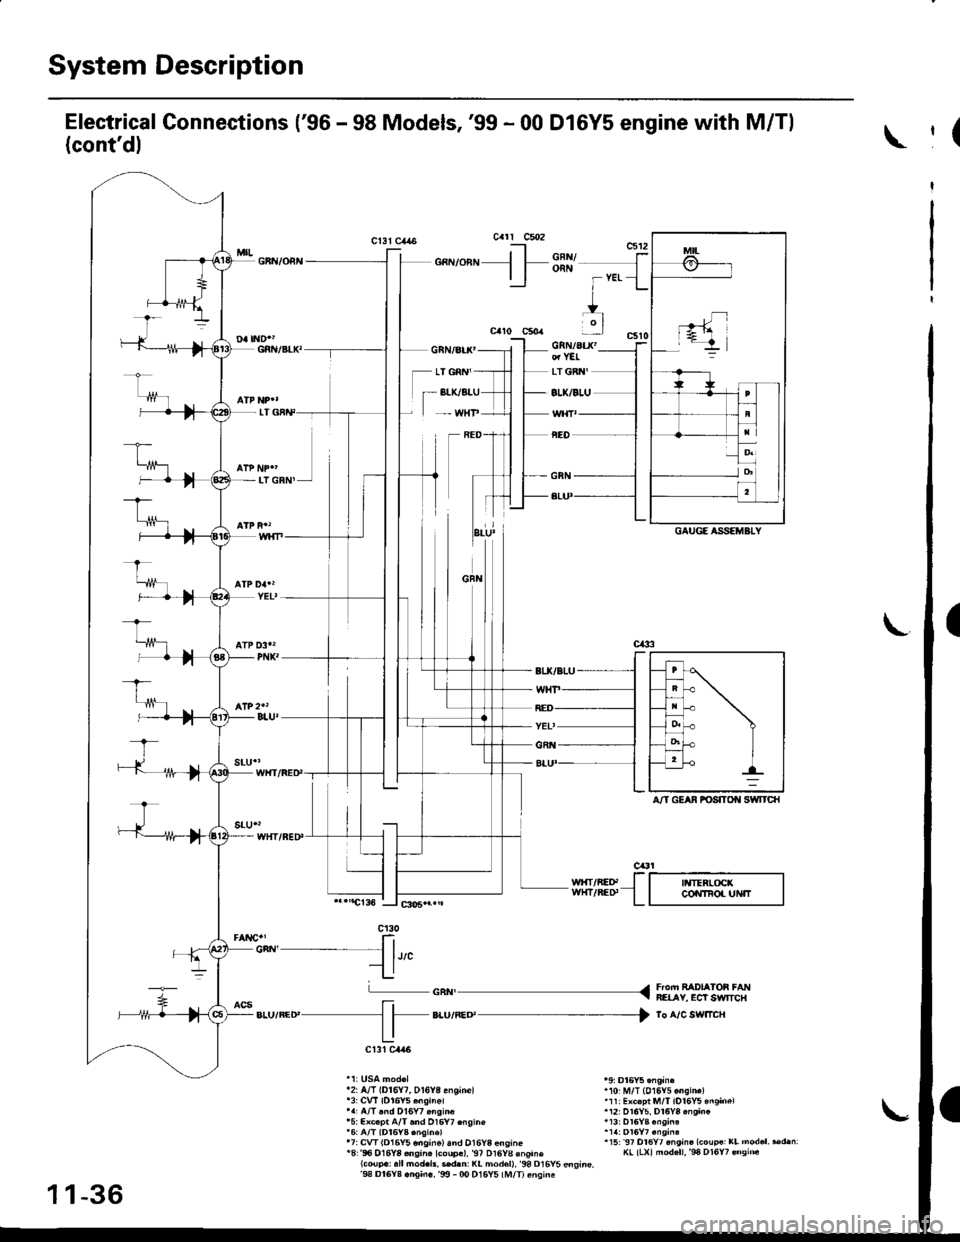 HONDA CIVIC 1997 6.G User Guide System Description
Electrical Connections (96 - 98 Models,99 - 00 Dl6Y5 engine with M/Tl
(contdl
GA|l/OfiN
Cl3i C,ta6cart c5o2t--l c5t2
o",.uonr. l FSIX {| | FYEI l
g
.lc5t0GRN/aaX: rdYEr. ILrGiN